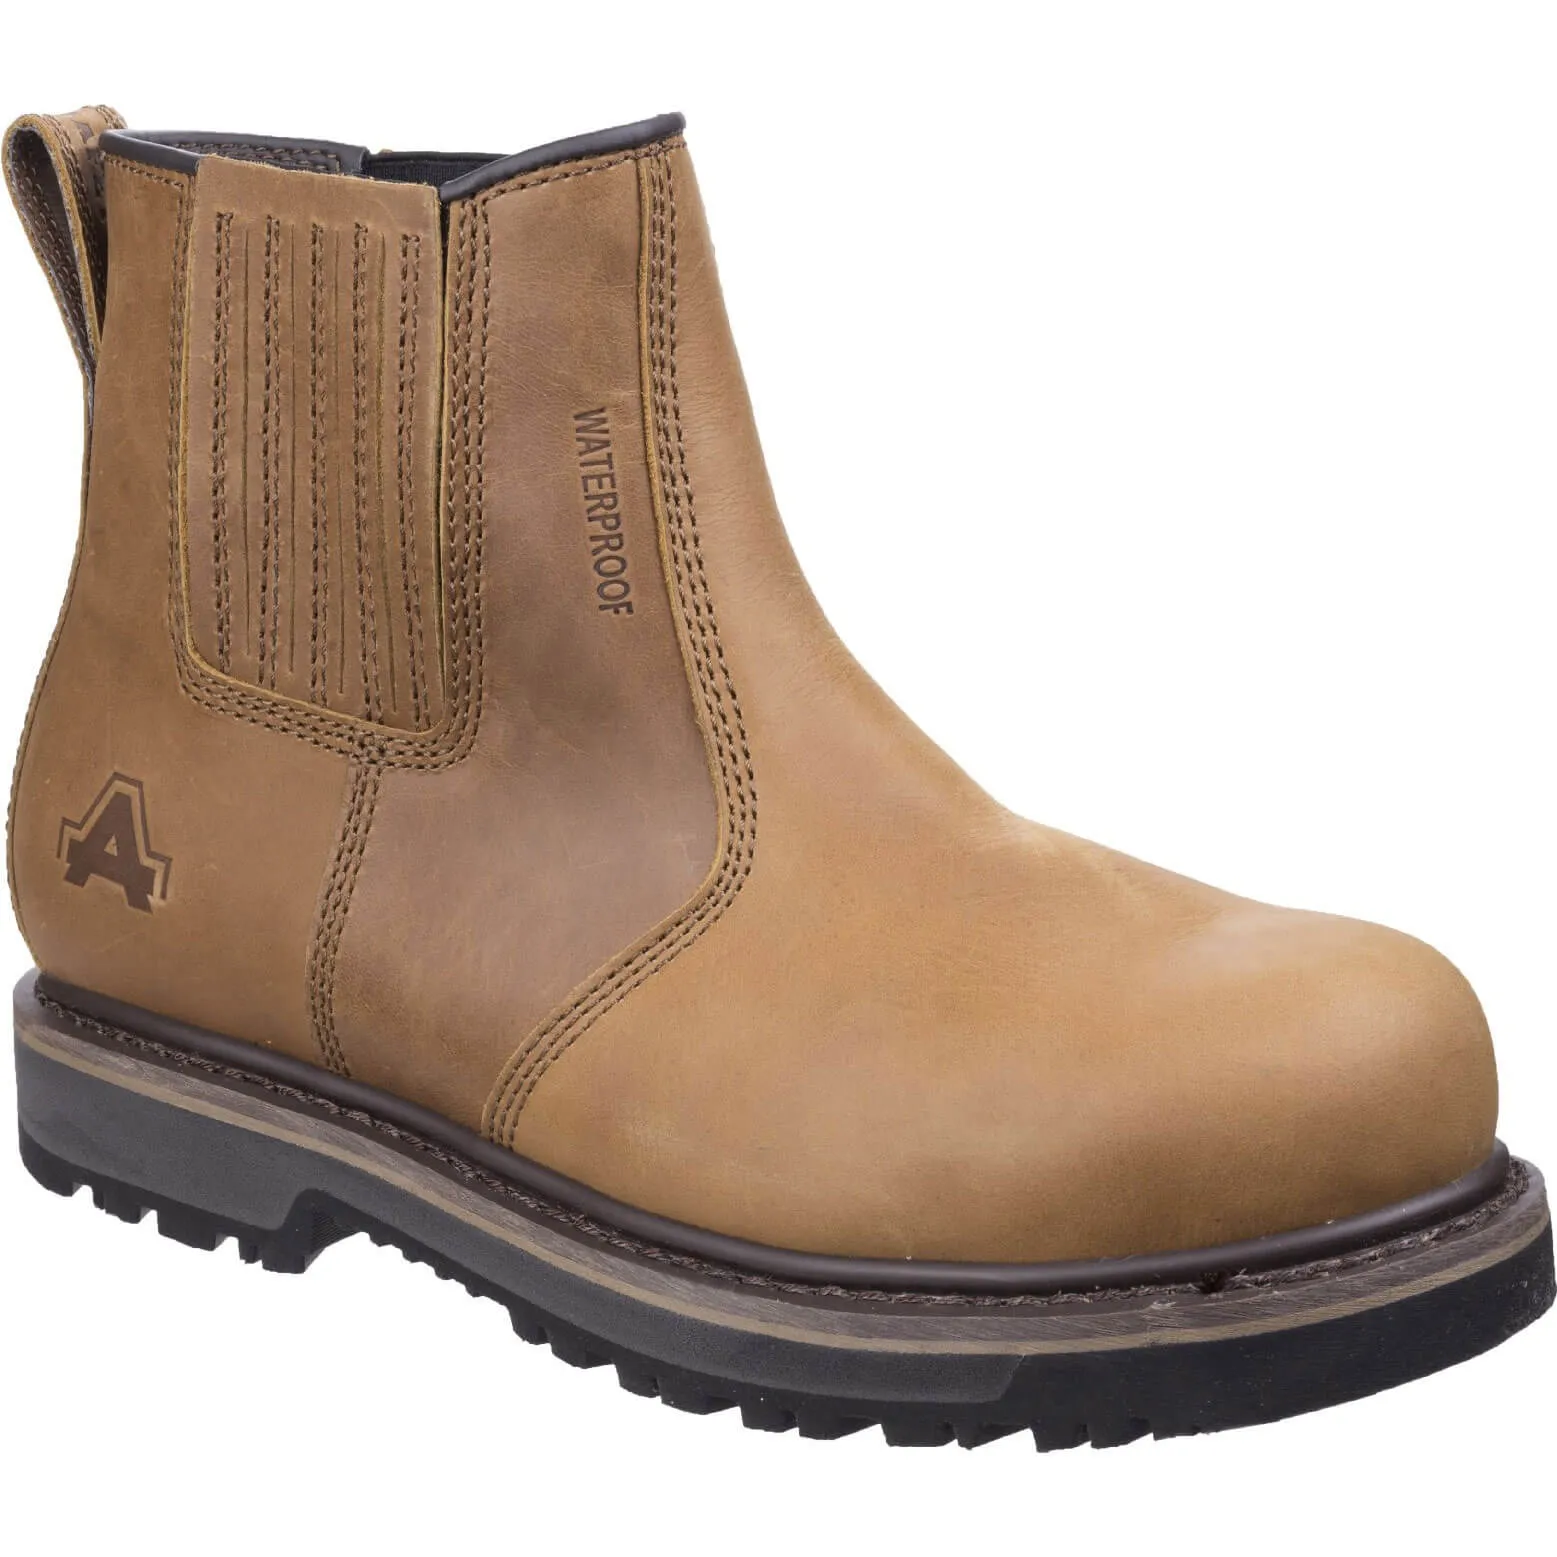 Amblers Mens Safety As232 Safety Boots - Tan, Size 8